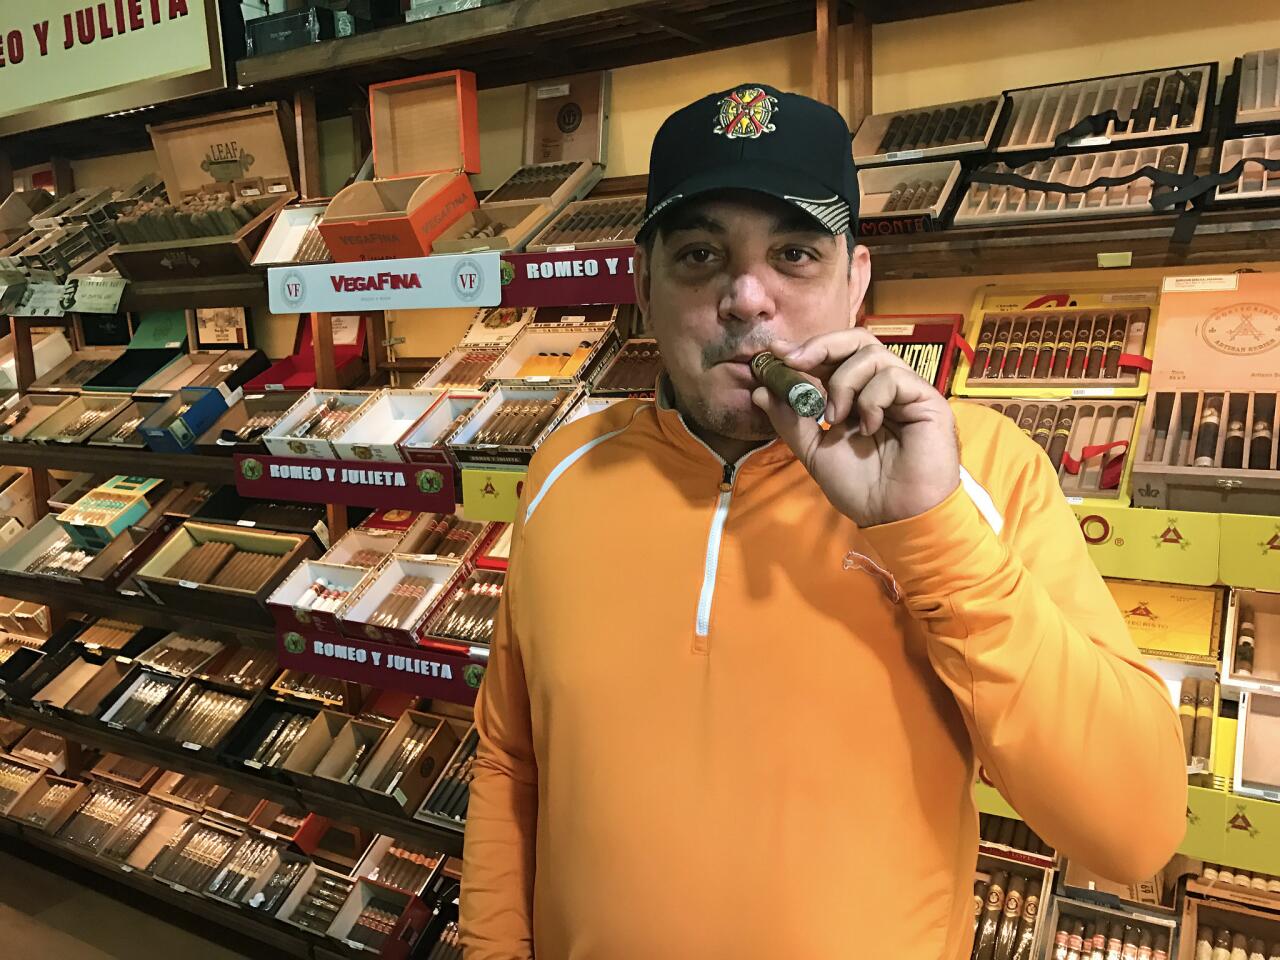 Miguel Cuenca, 53, owner of the Hollywood store Cuenca Cigars, Inc. didn't see any reasons to celebrate. "I would be happy if they had hung him on a tree or had judged him," he said while smoking an Arturo Fuente Don Carlos cigar. "But he died happy in the comfort of his family. He has never paid for his crimes." He left Cuba in 2001, and vowed never to return until things change in his home country. After hearing the news Friday night, he stayed up discussing the future of Cuba with about 15 other people until 3 a.m. "I would be happy if he had been judged," he said.